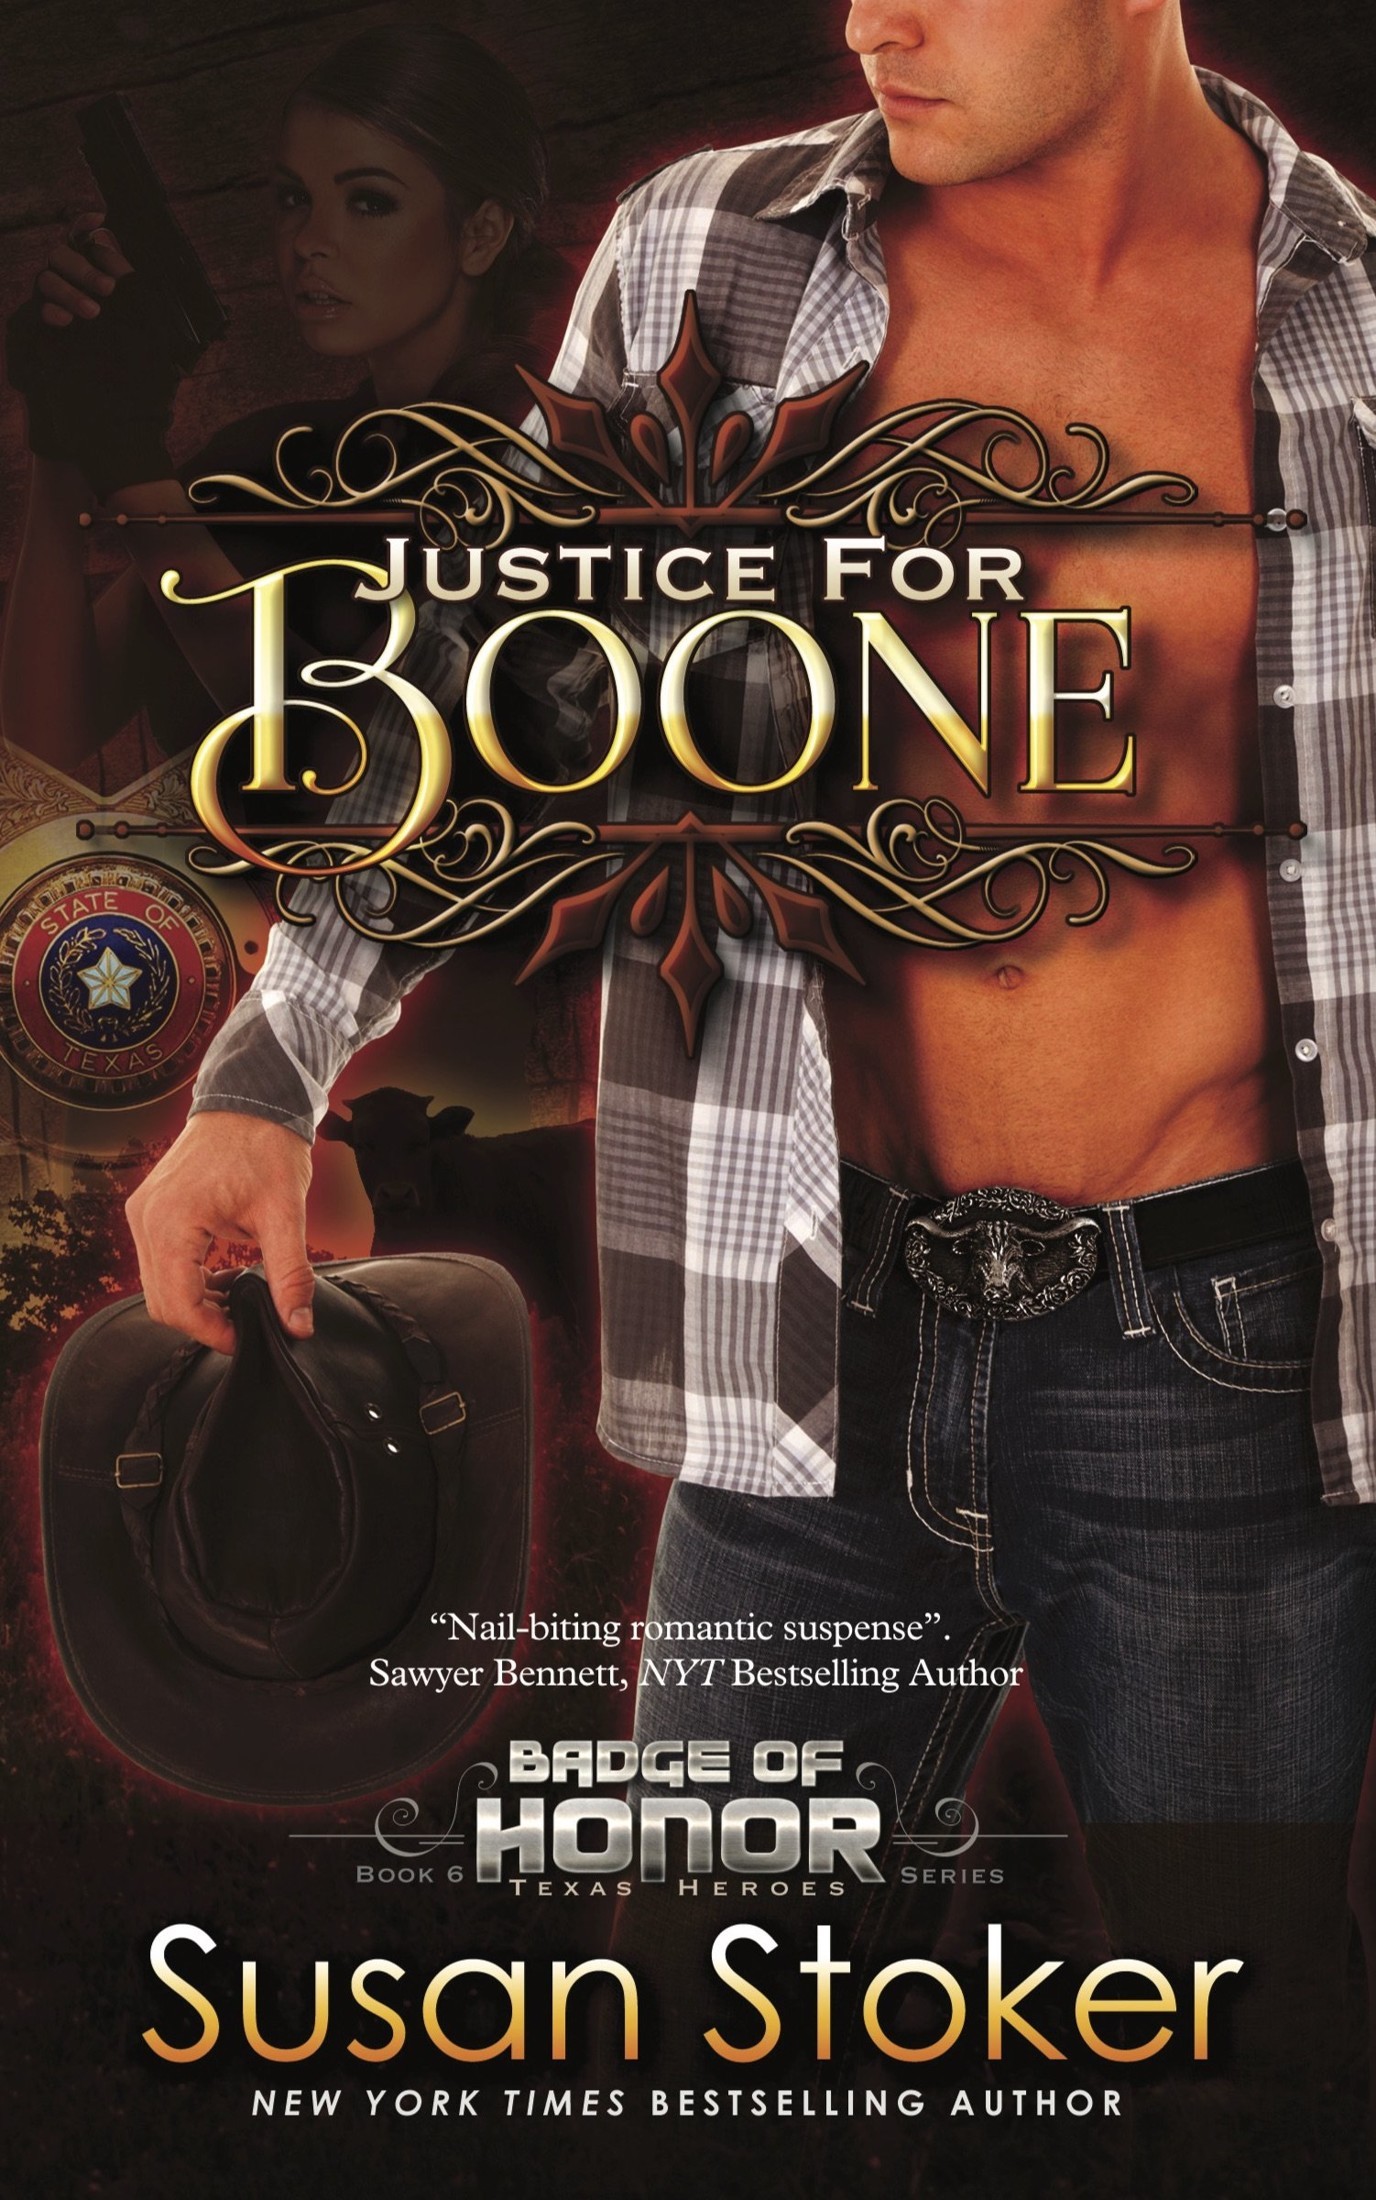 Justice for Boone: Badge of Honor: Texas Heroes, Book 6